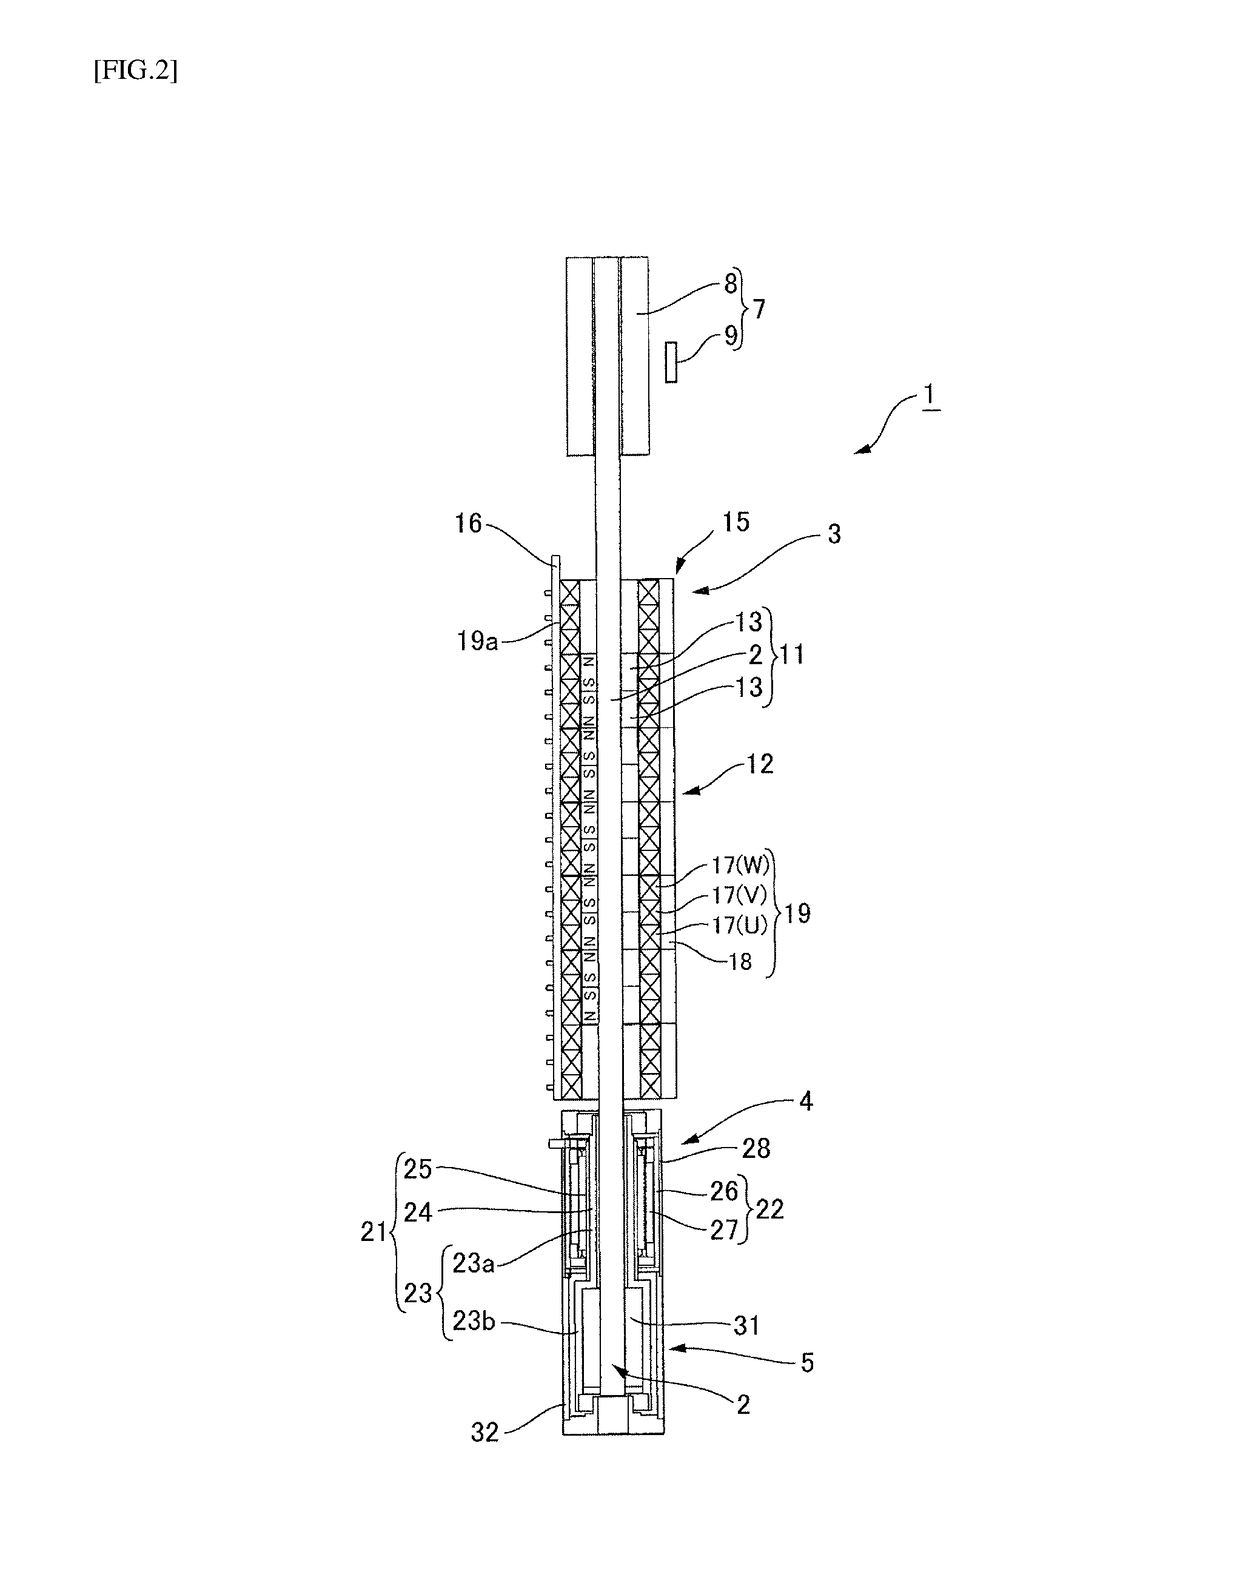 Linear motion and rotation drive apparatus